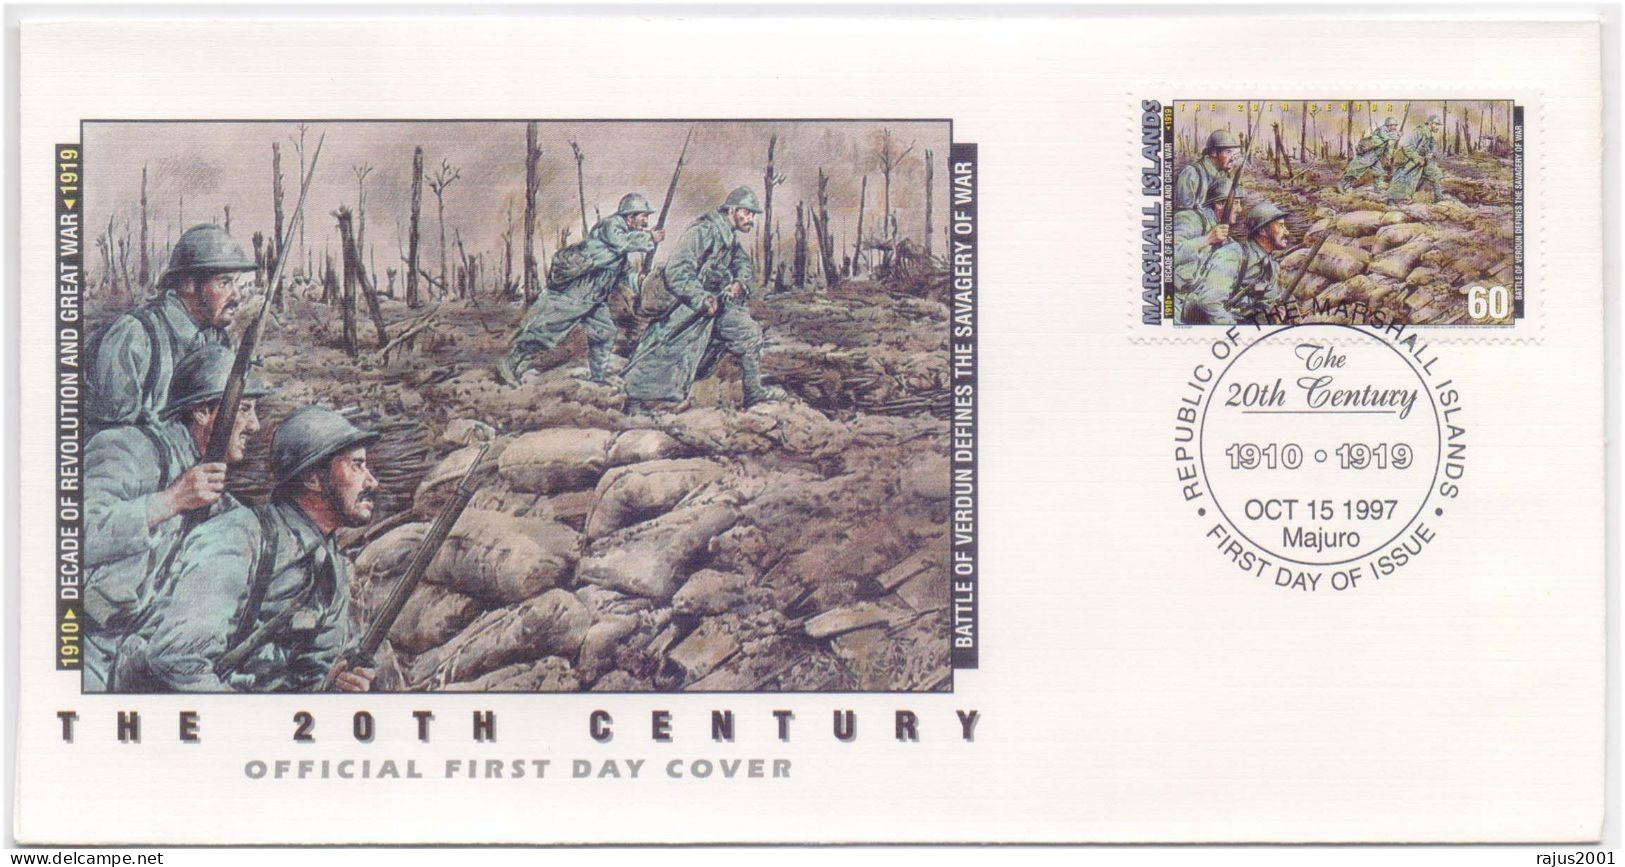 Battle Of Verdun Defines The Savagery Of War Longest And Bloodiest Battle Of World War I, Kills More Than 1 Million, FDC - Guerre Mondiale (Première)